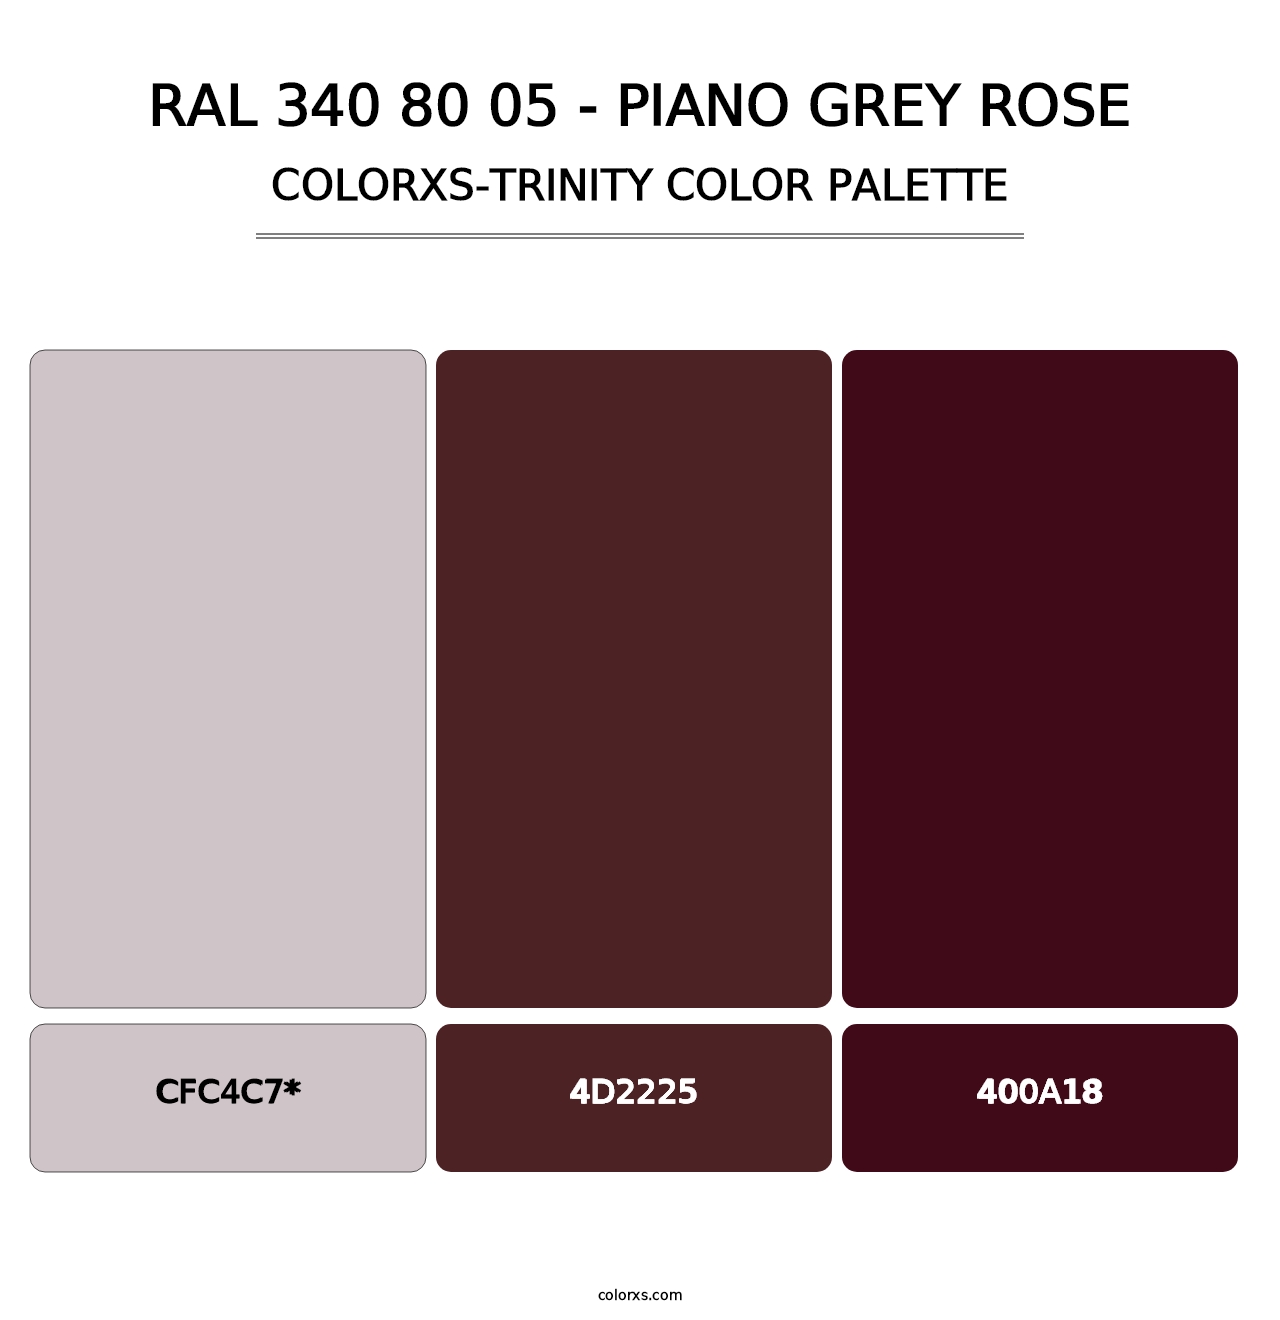 RAL 340 80 05 - Piano Grey Rose - Colorxs Trinity Palette